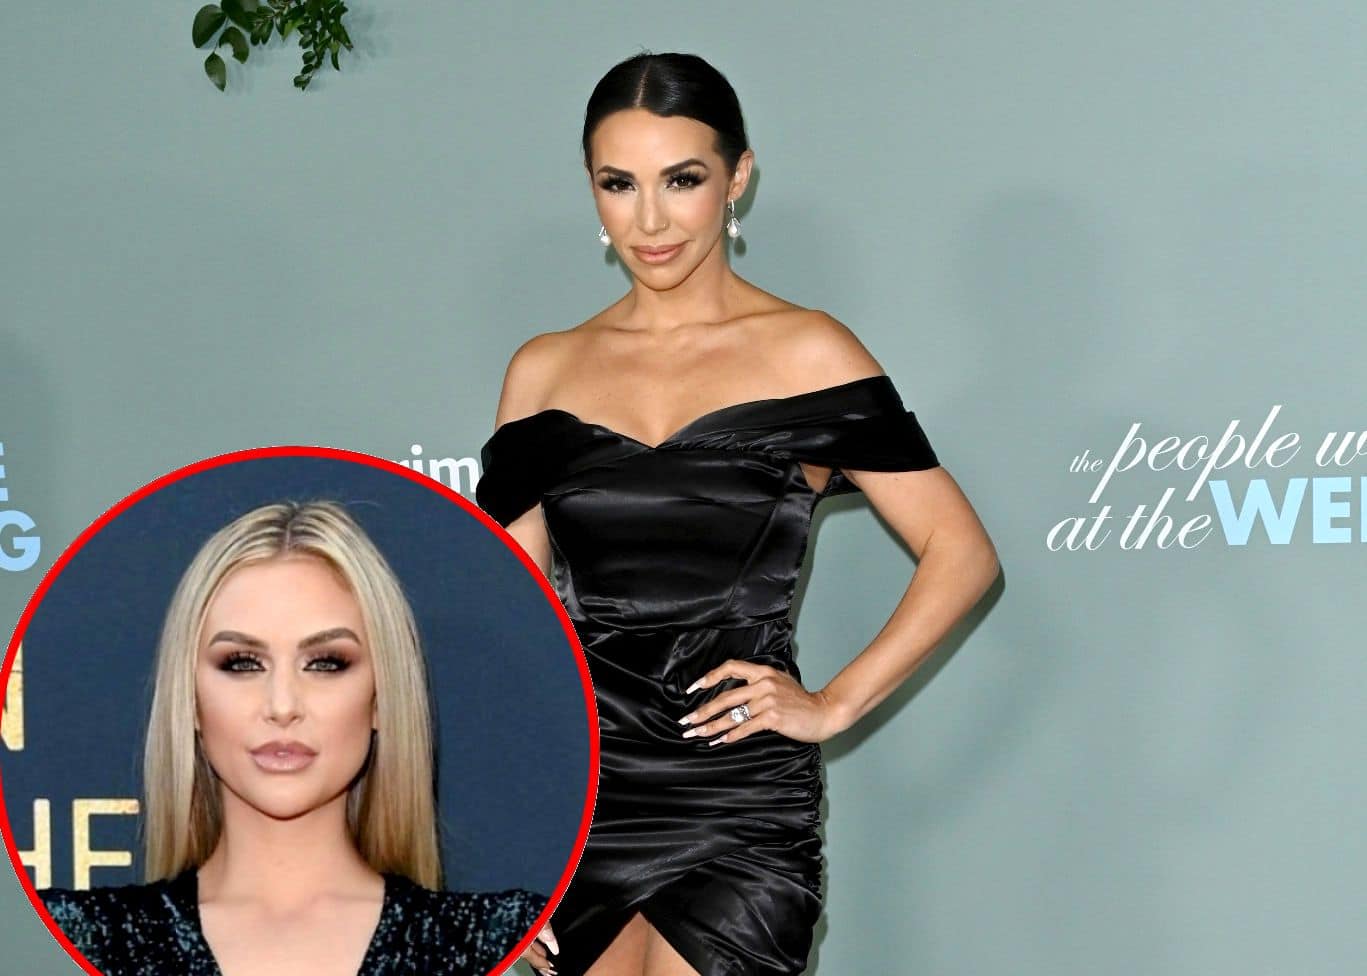 Scheana Shay Discusses How Lala Kent Upset Her, Worst of Vanderpump Rules' New Season, Girls Trip Snub, and Being "Terrified" to Get Pregnant